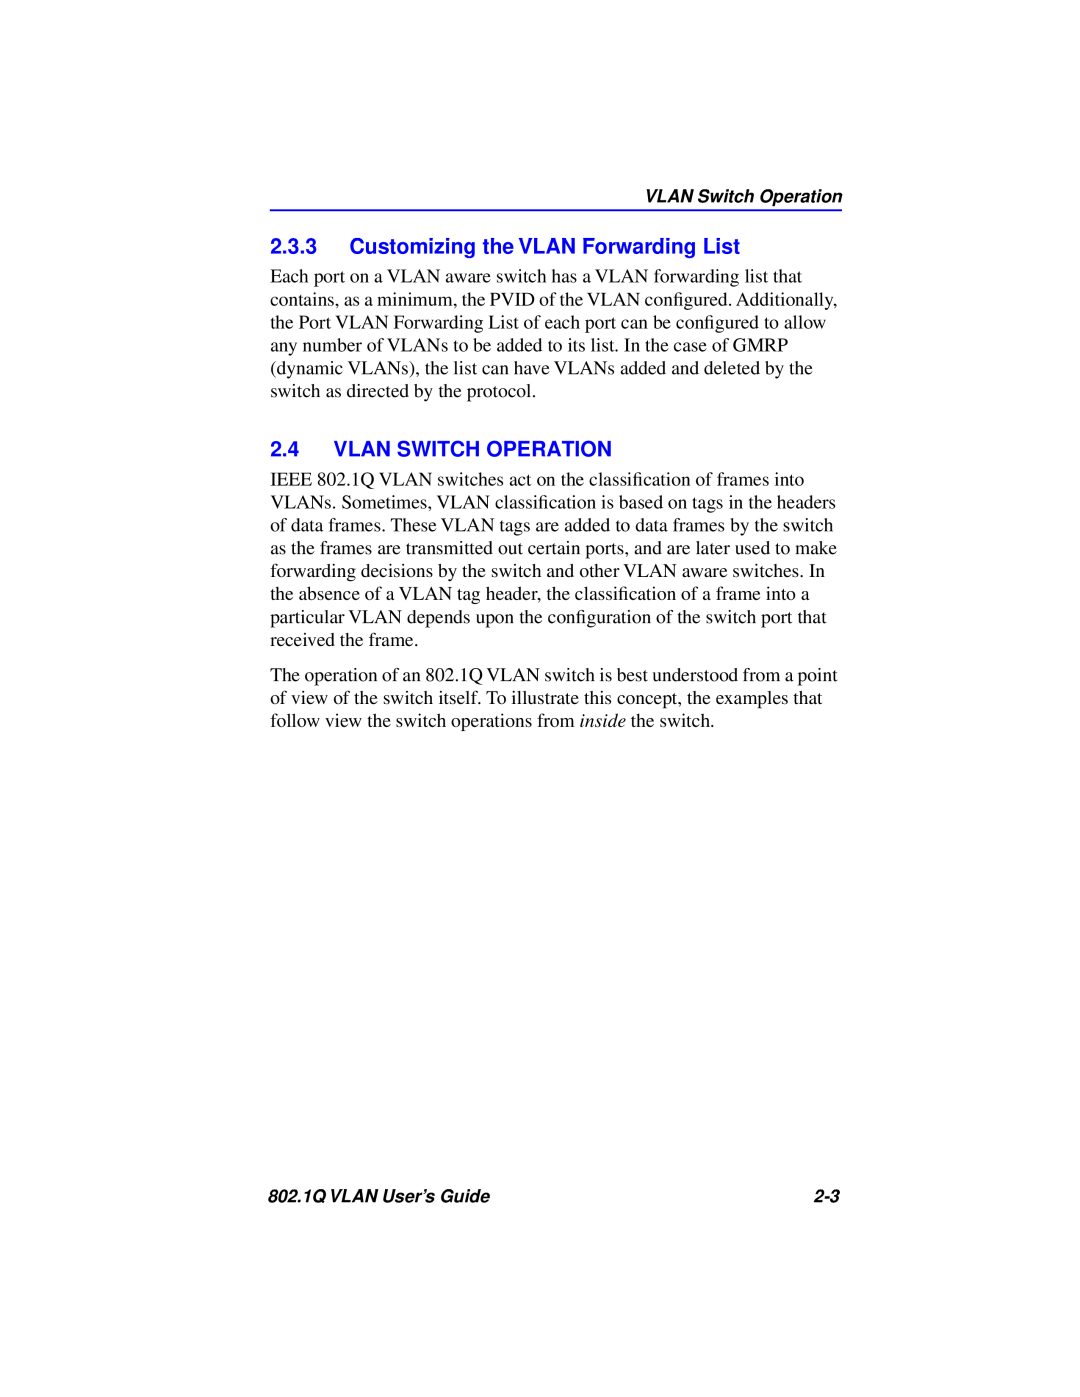 Cabletron Systems 802.1Q manual Customizing the VLAN Forwarding List, Vlan Switch Operation 